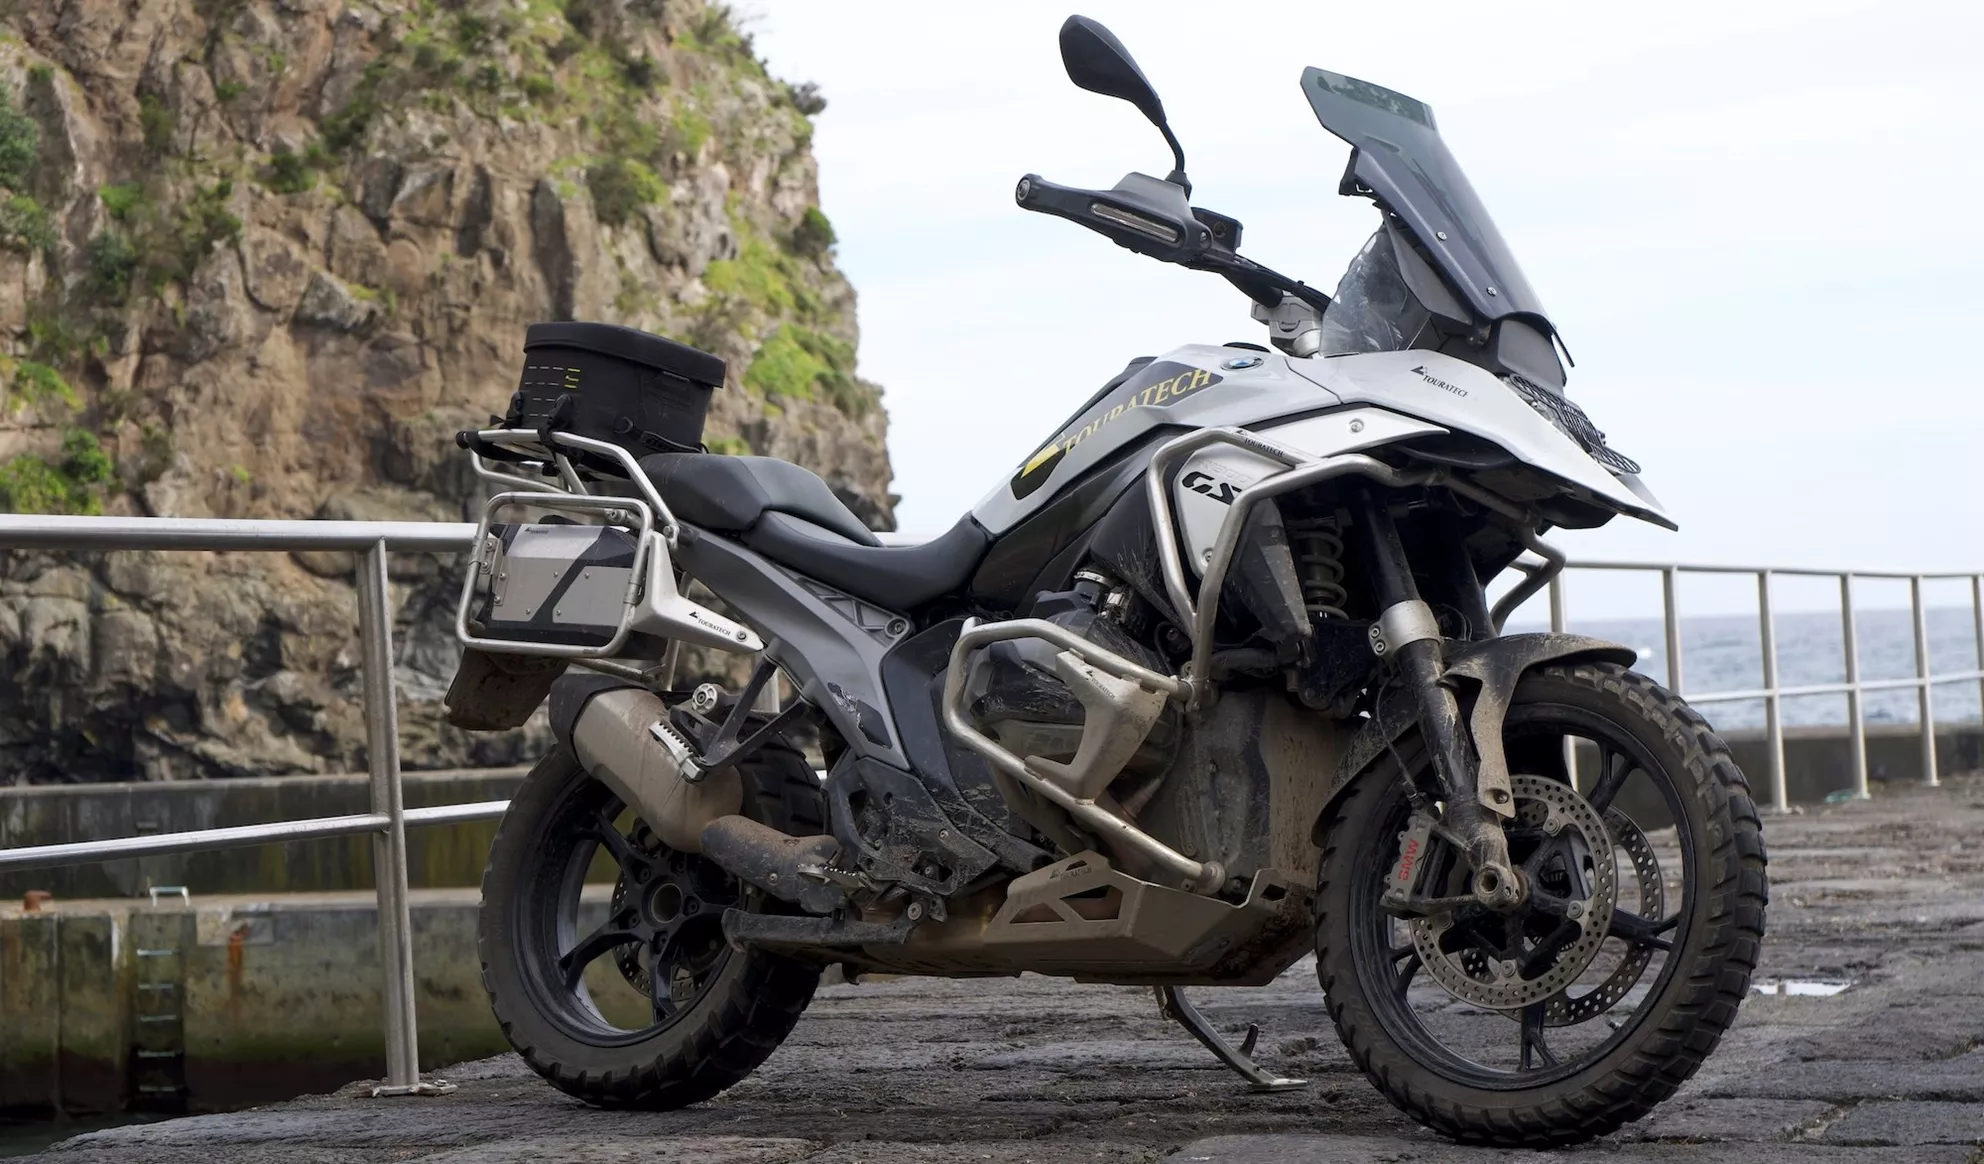 1 week of intensive off-road testing with the BMW R 1300 GS in the Azores